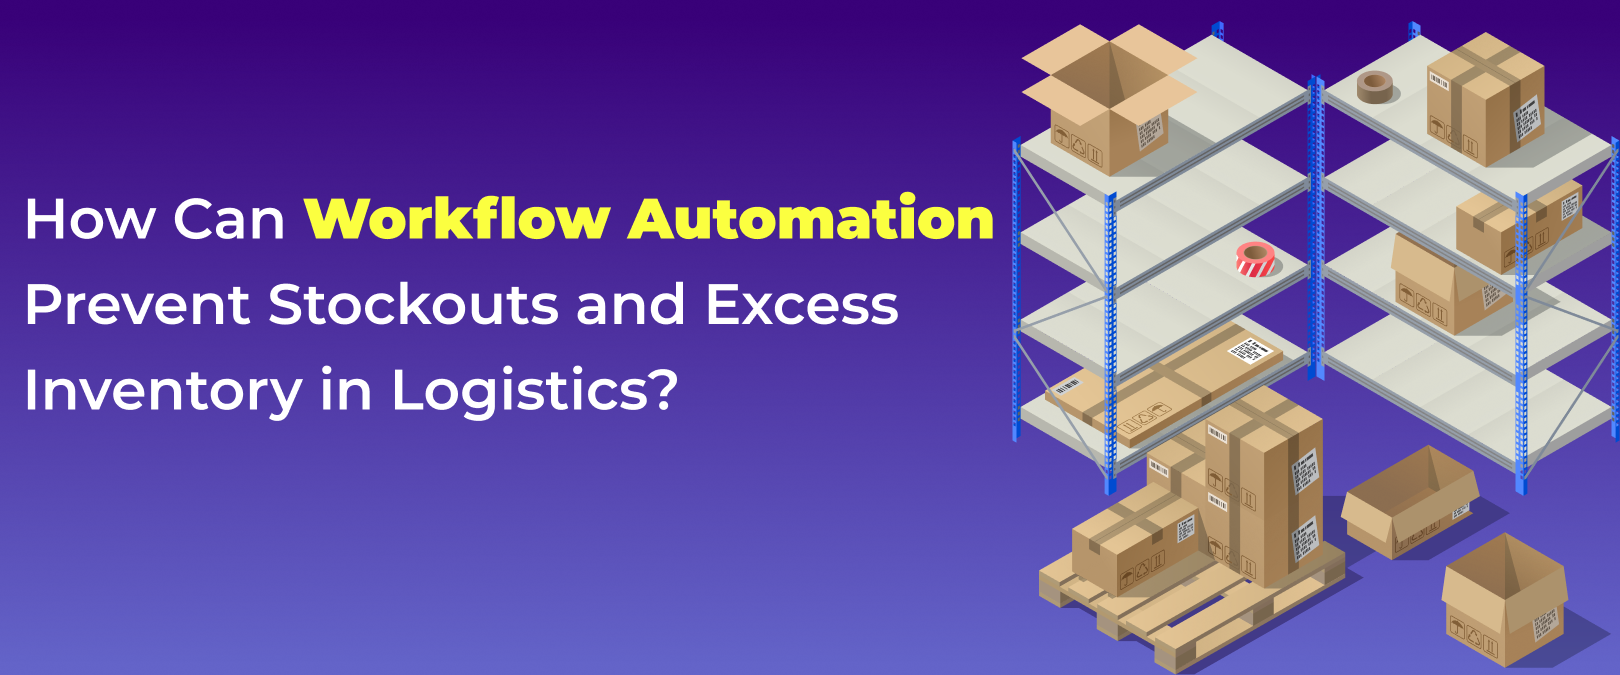 How Can Workflow Automation Prevent Stockouts and Excess Inventory in Logistics?